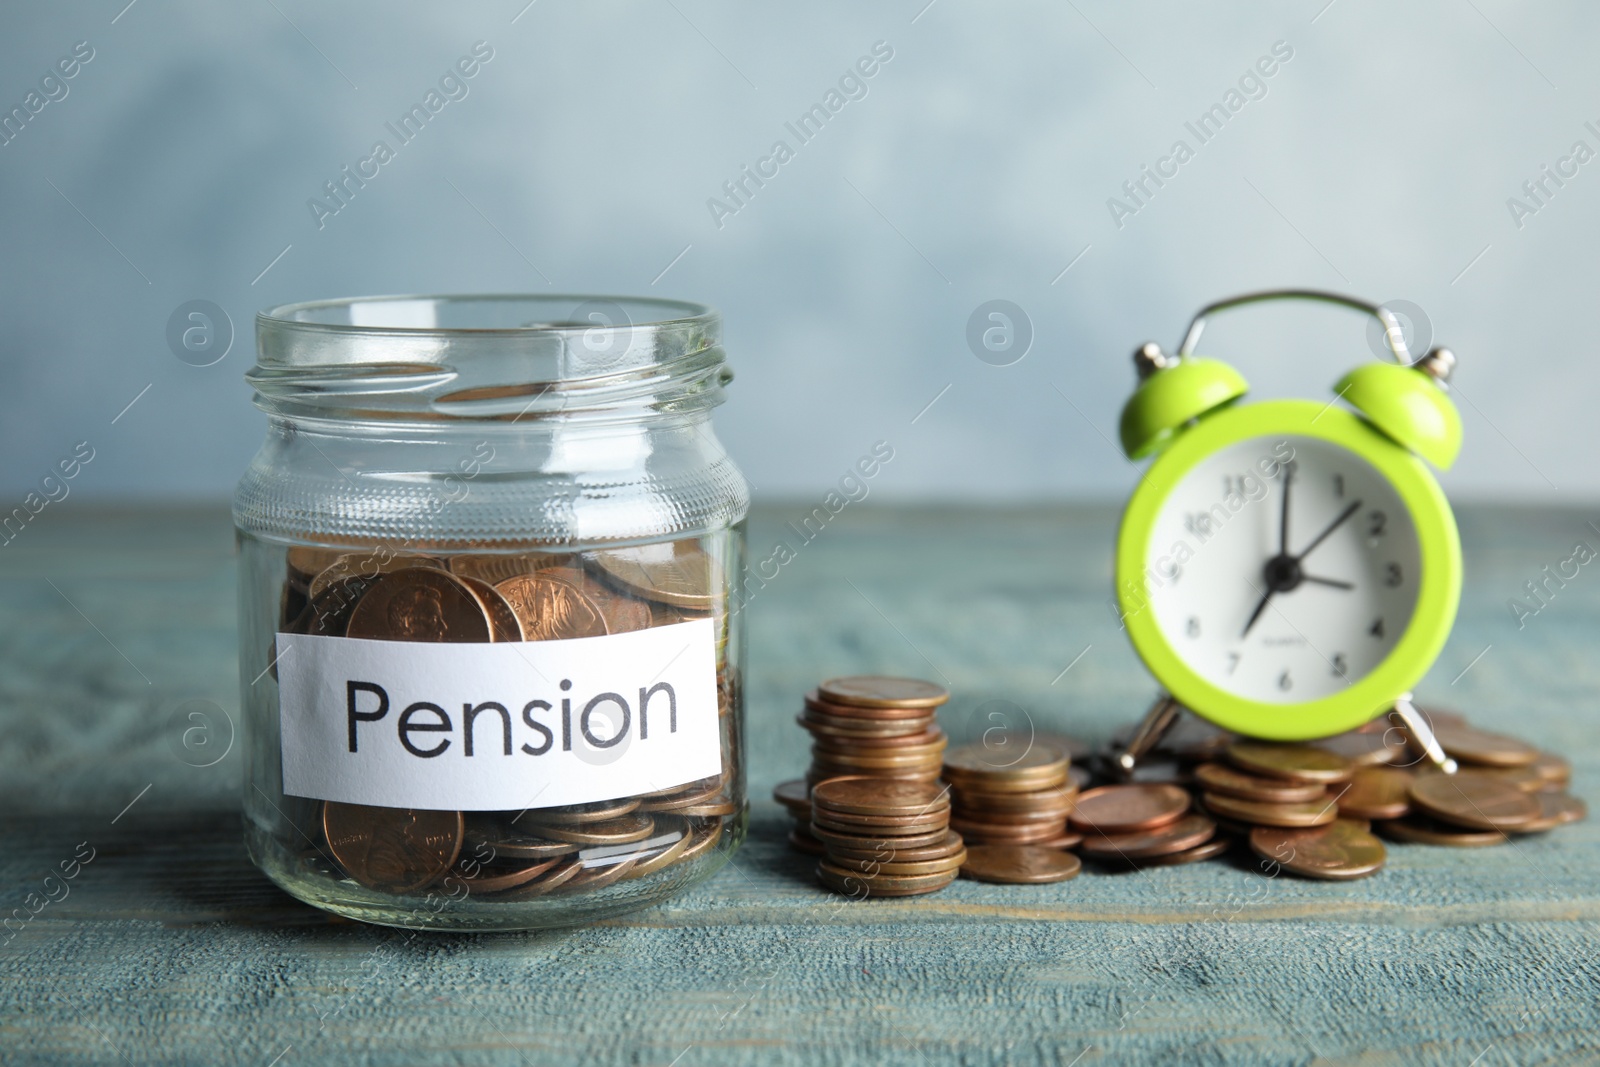 Photo of Glass jar with label PENSION and coins near alarm clock on wooden table